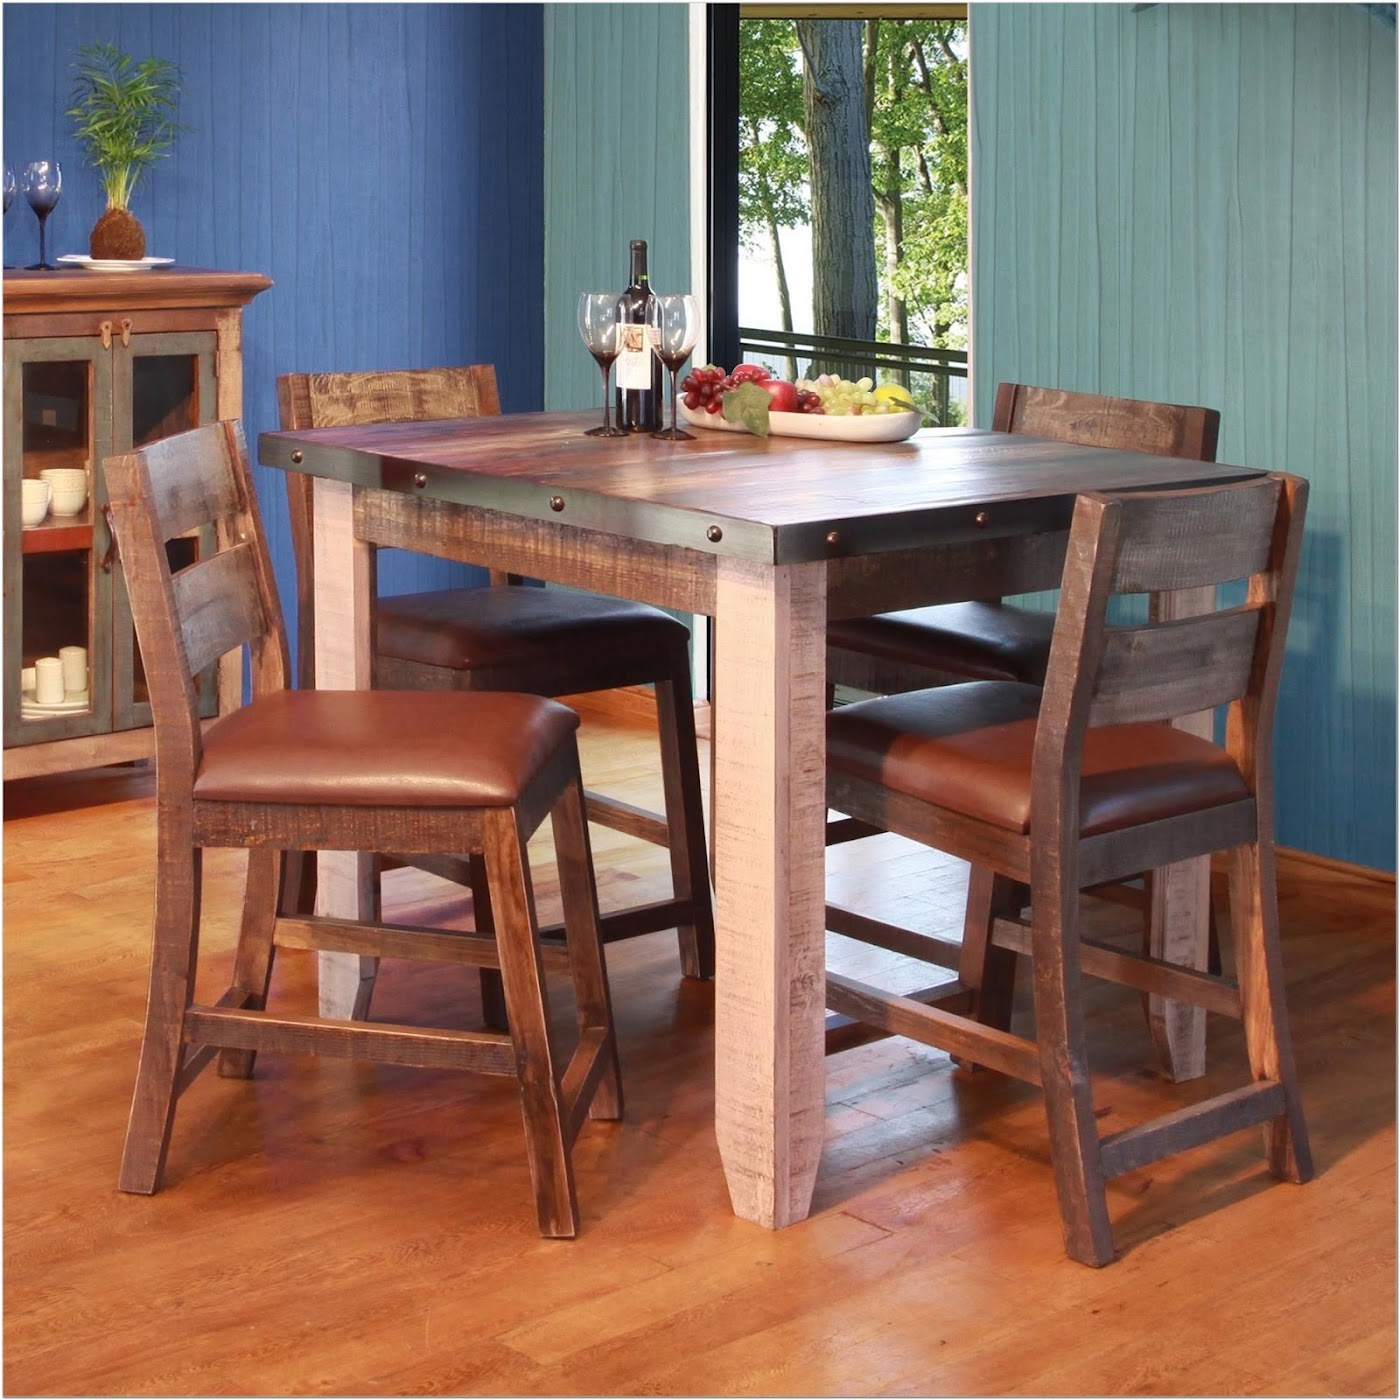 8 Seater Dining Table Nz